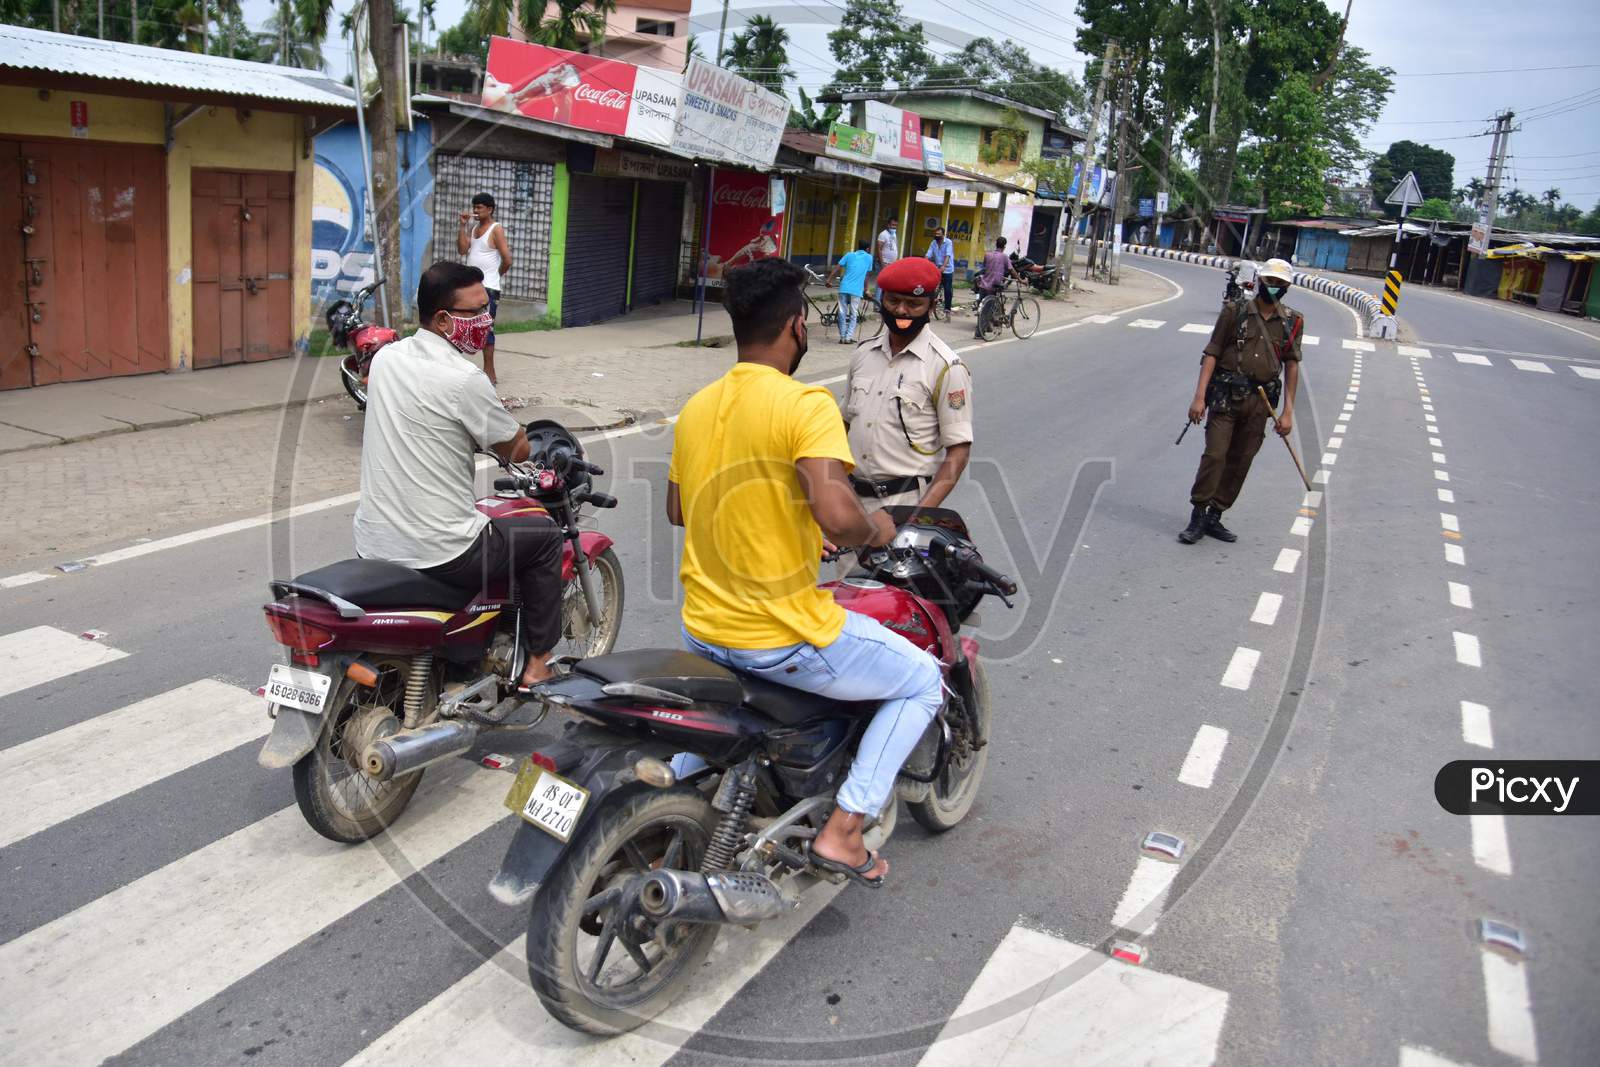 Police officers question bike riders during the lockdown imposed by the Assam government to curb the spread of coronavirus in Nagaon, Assam on July 04, 2020